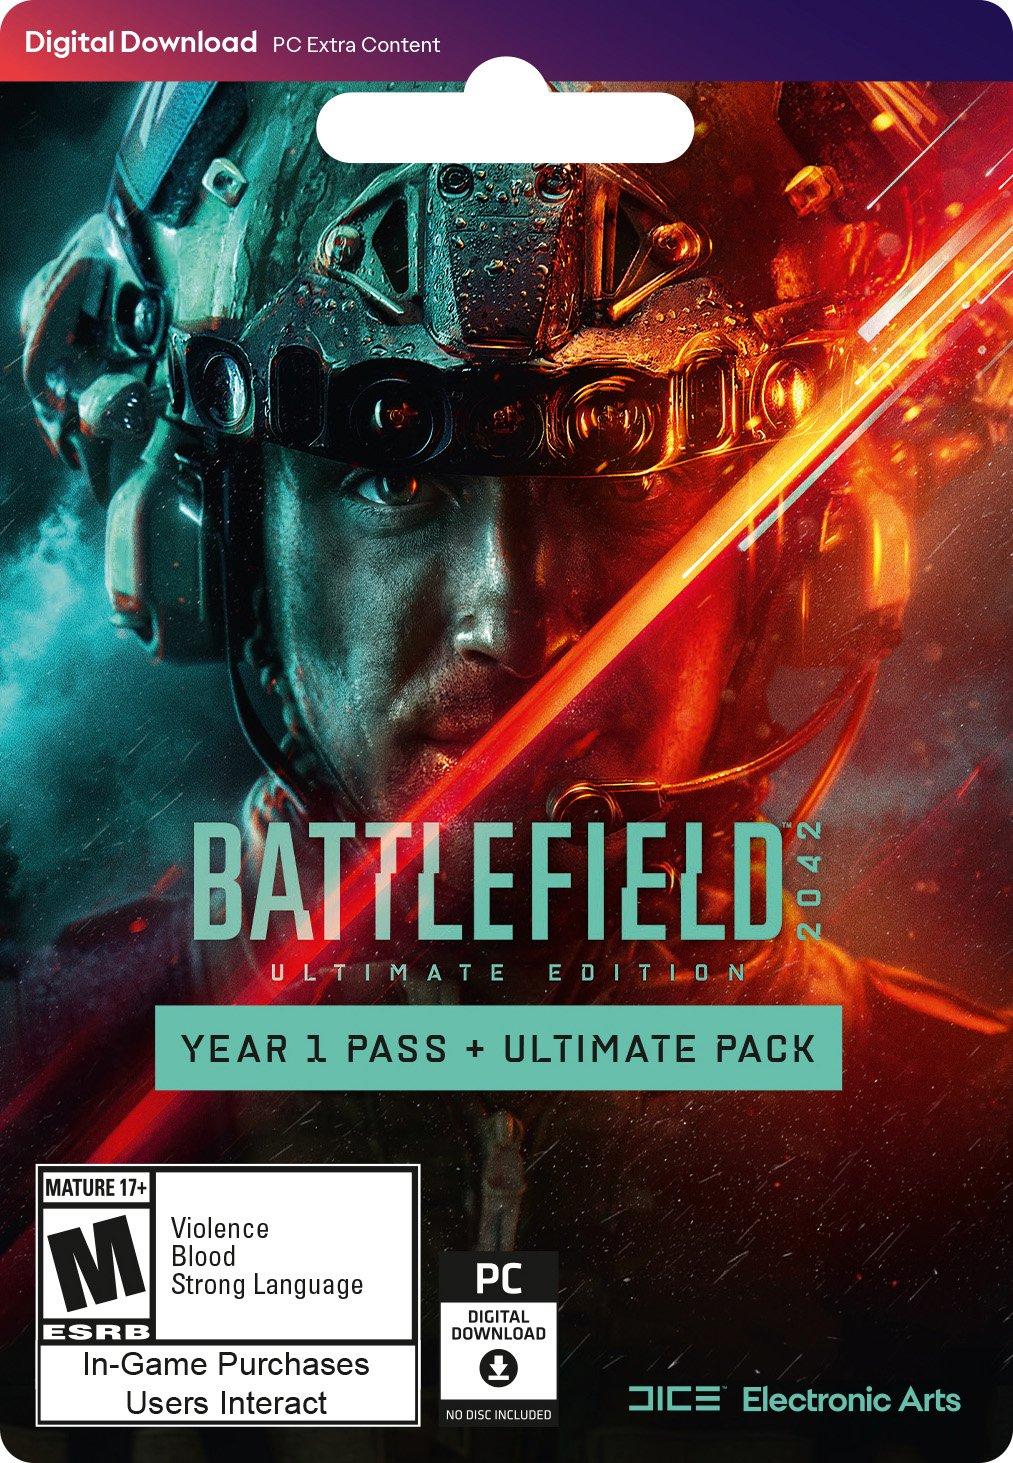 Electronic Arts app GameStop x EA Ultimate - Edition Ultimate Year | 1 Pack 2042 Pass PC Battlefield